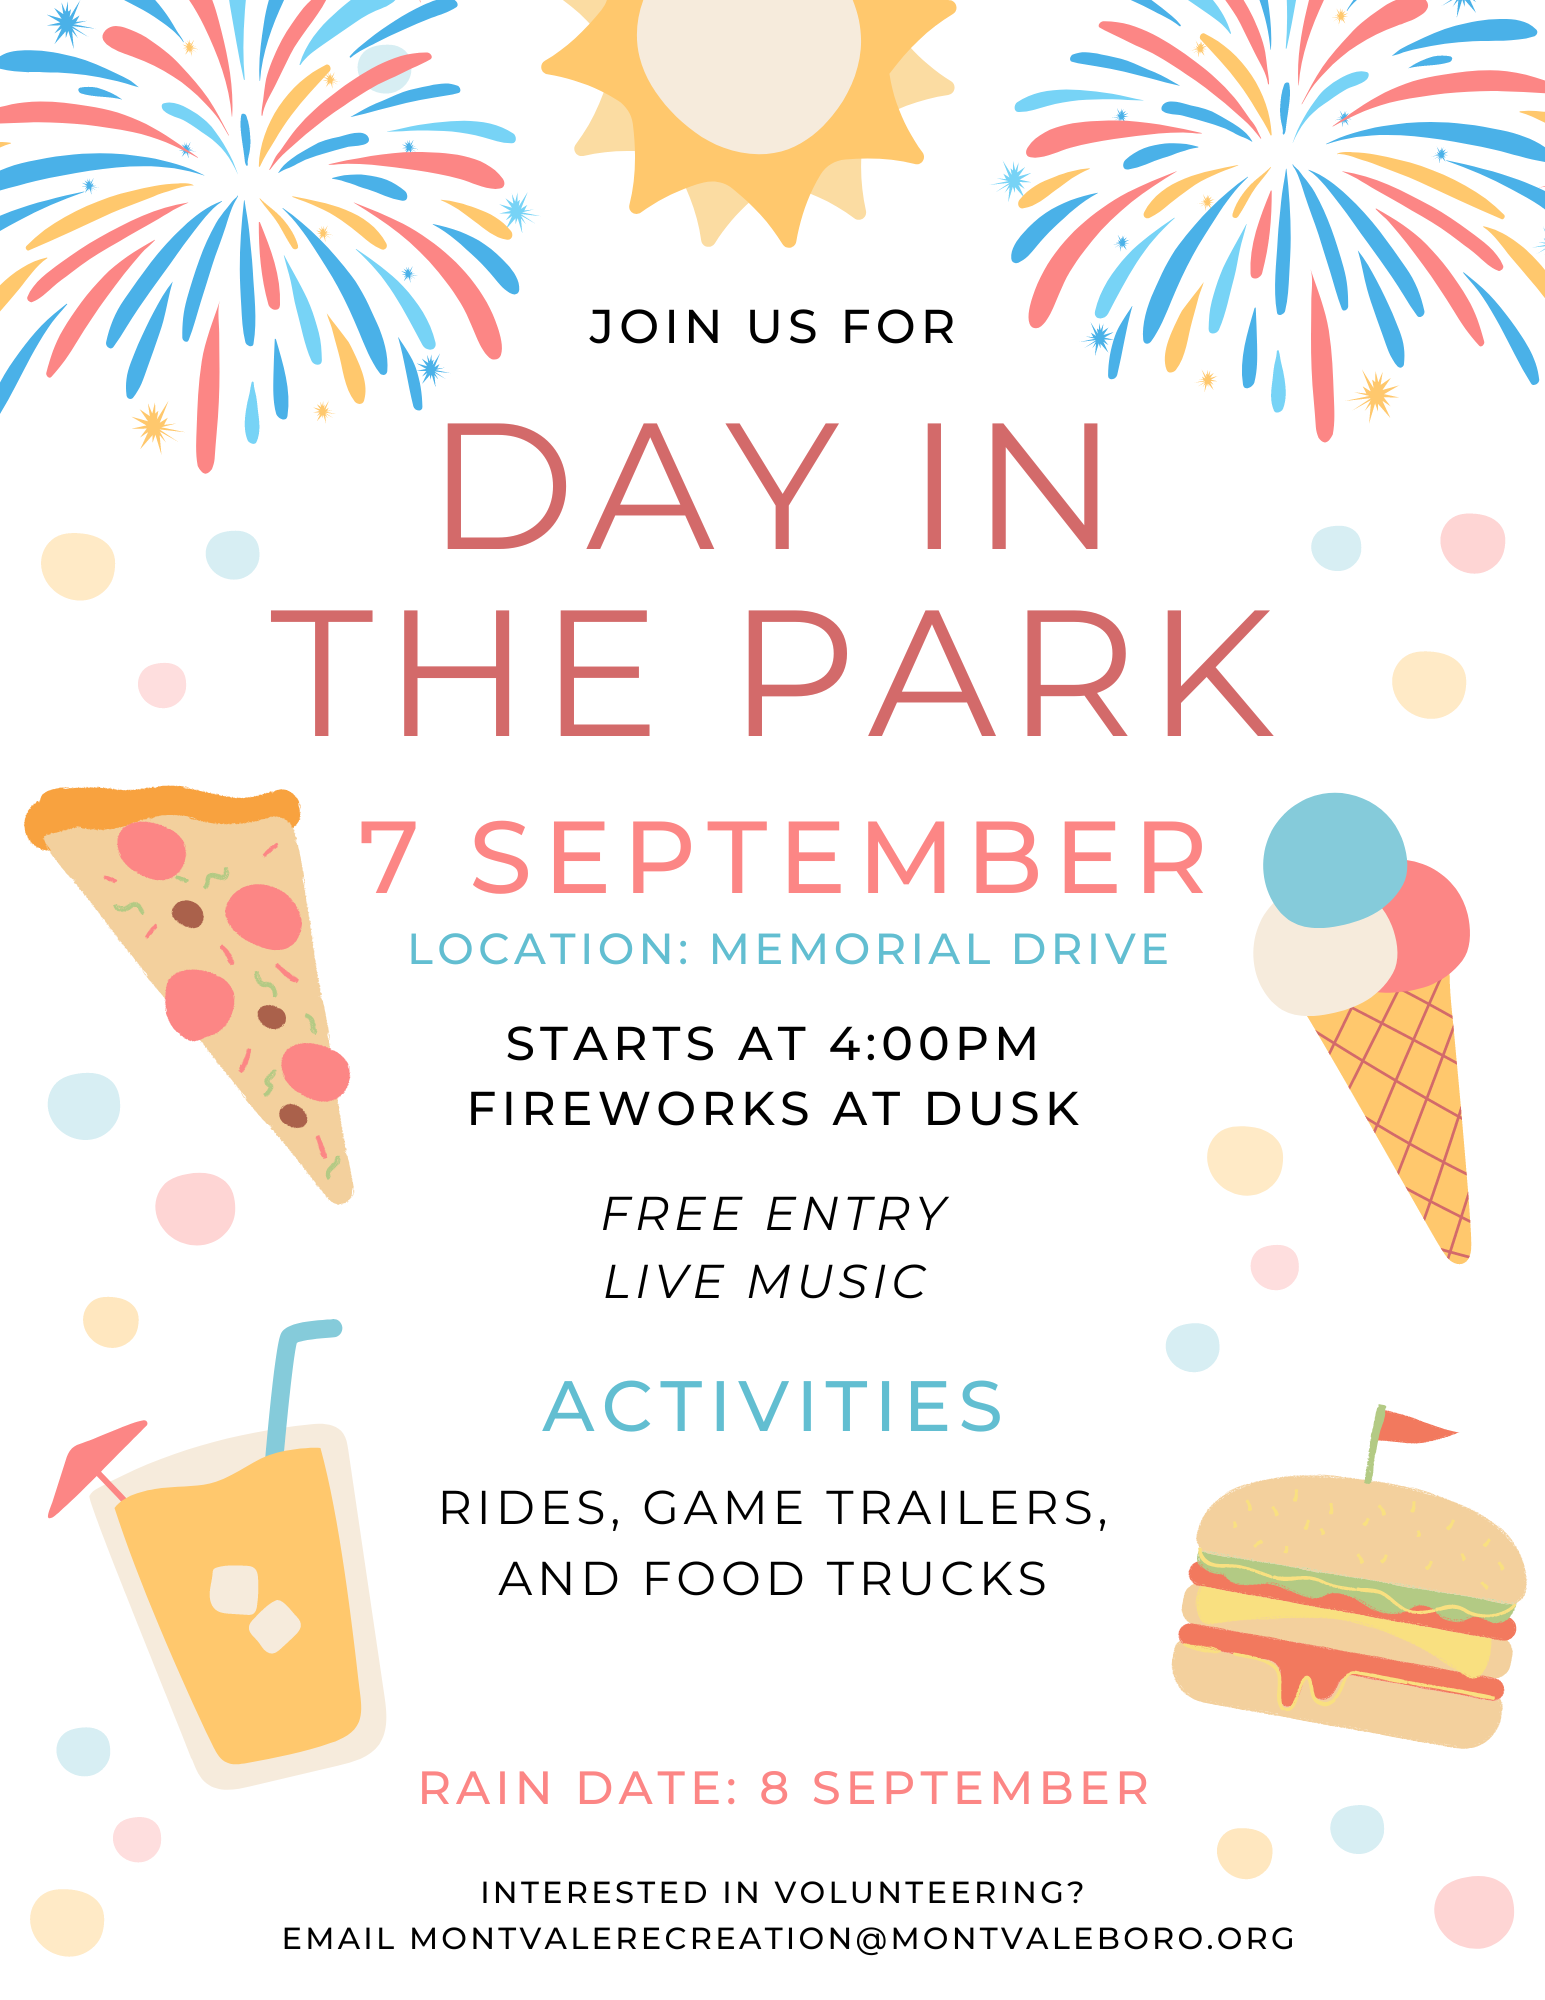 Day In The Park Event flyer. Click to open an OCR scanned PDF version of this.